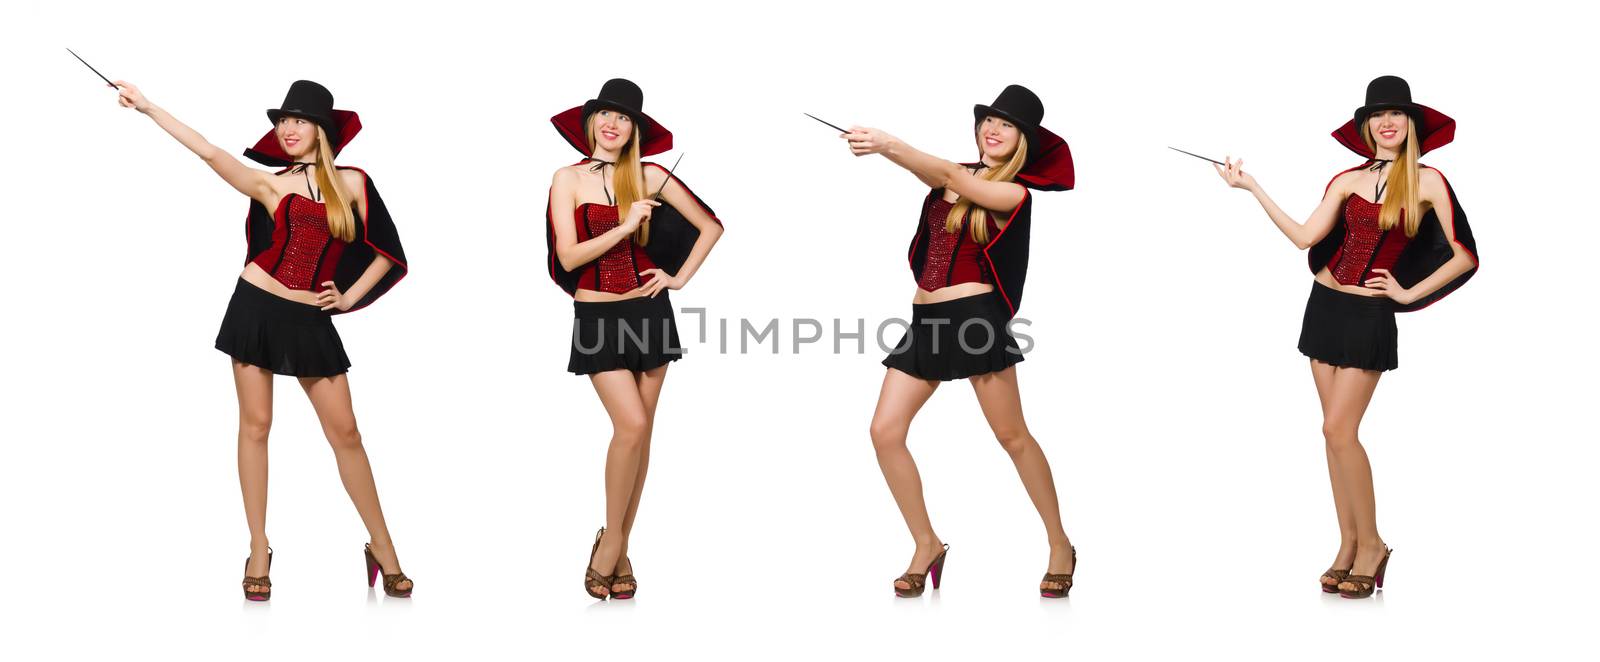 Woman magician with magic wand on white